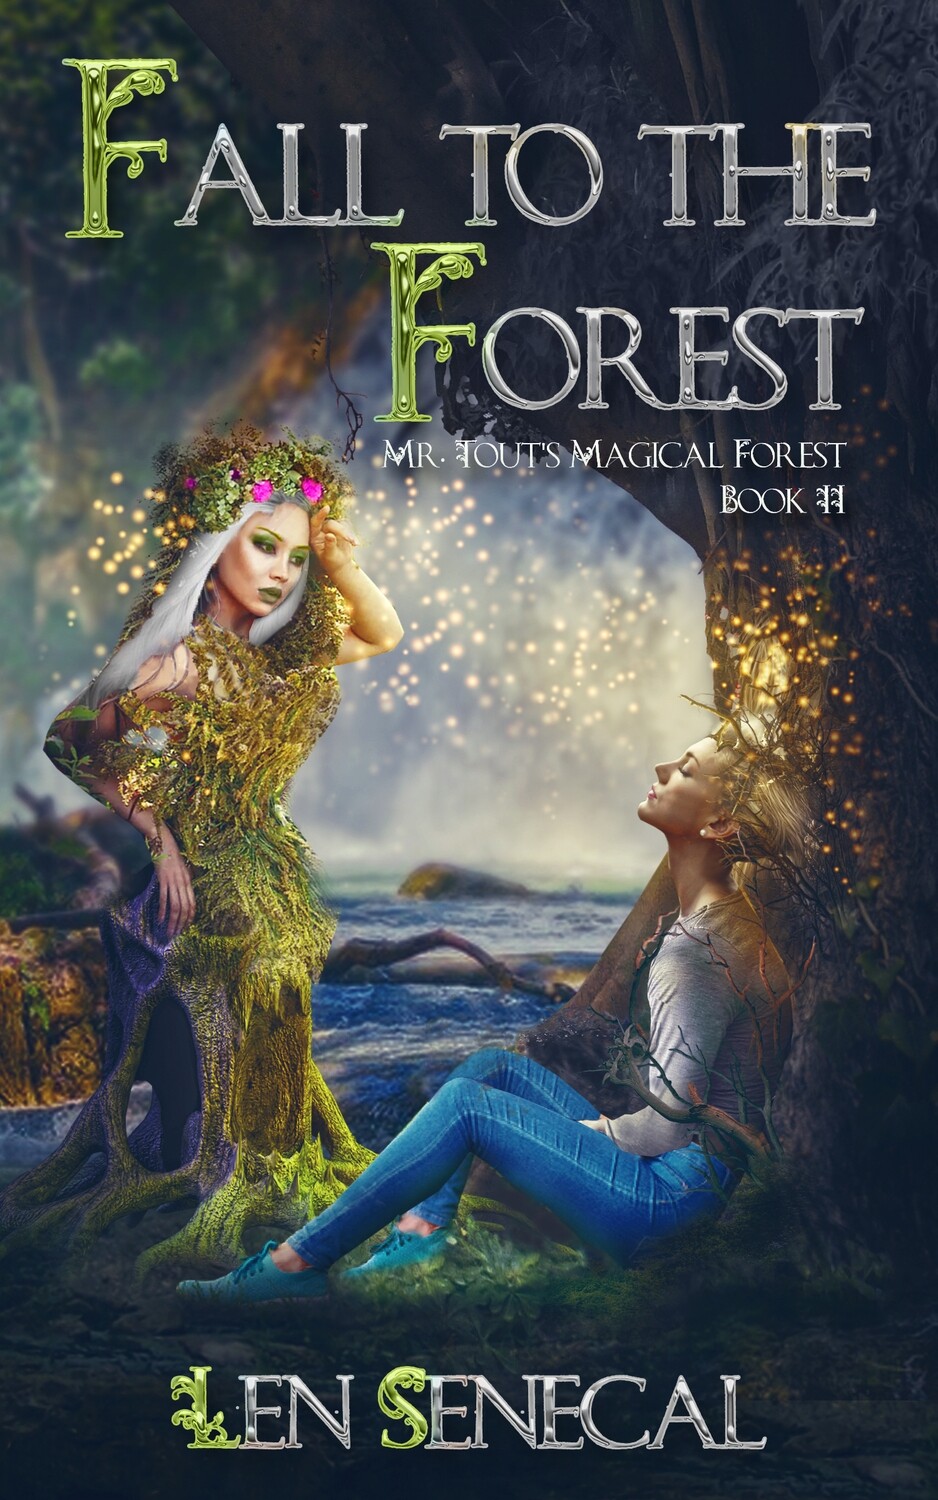 Fall to the Forest-Book II of Mr. Tout's Magical Forest paperback edition